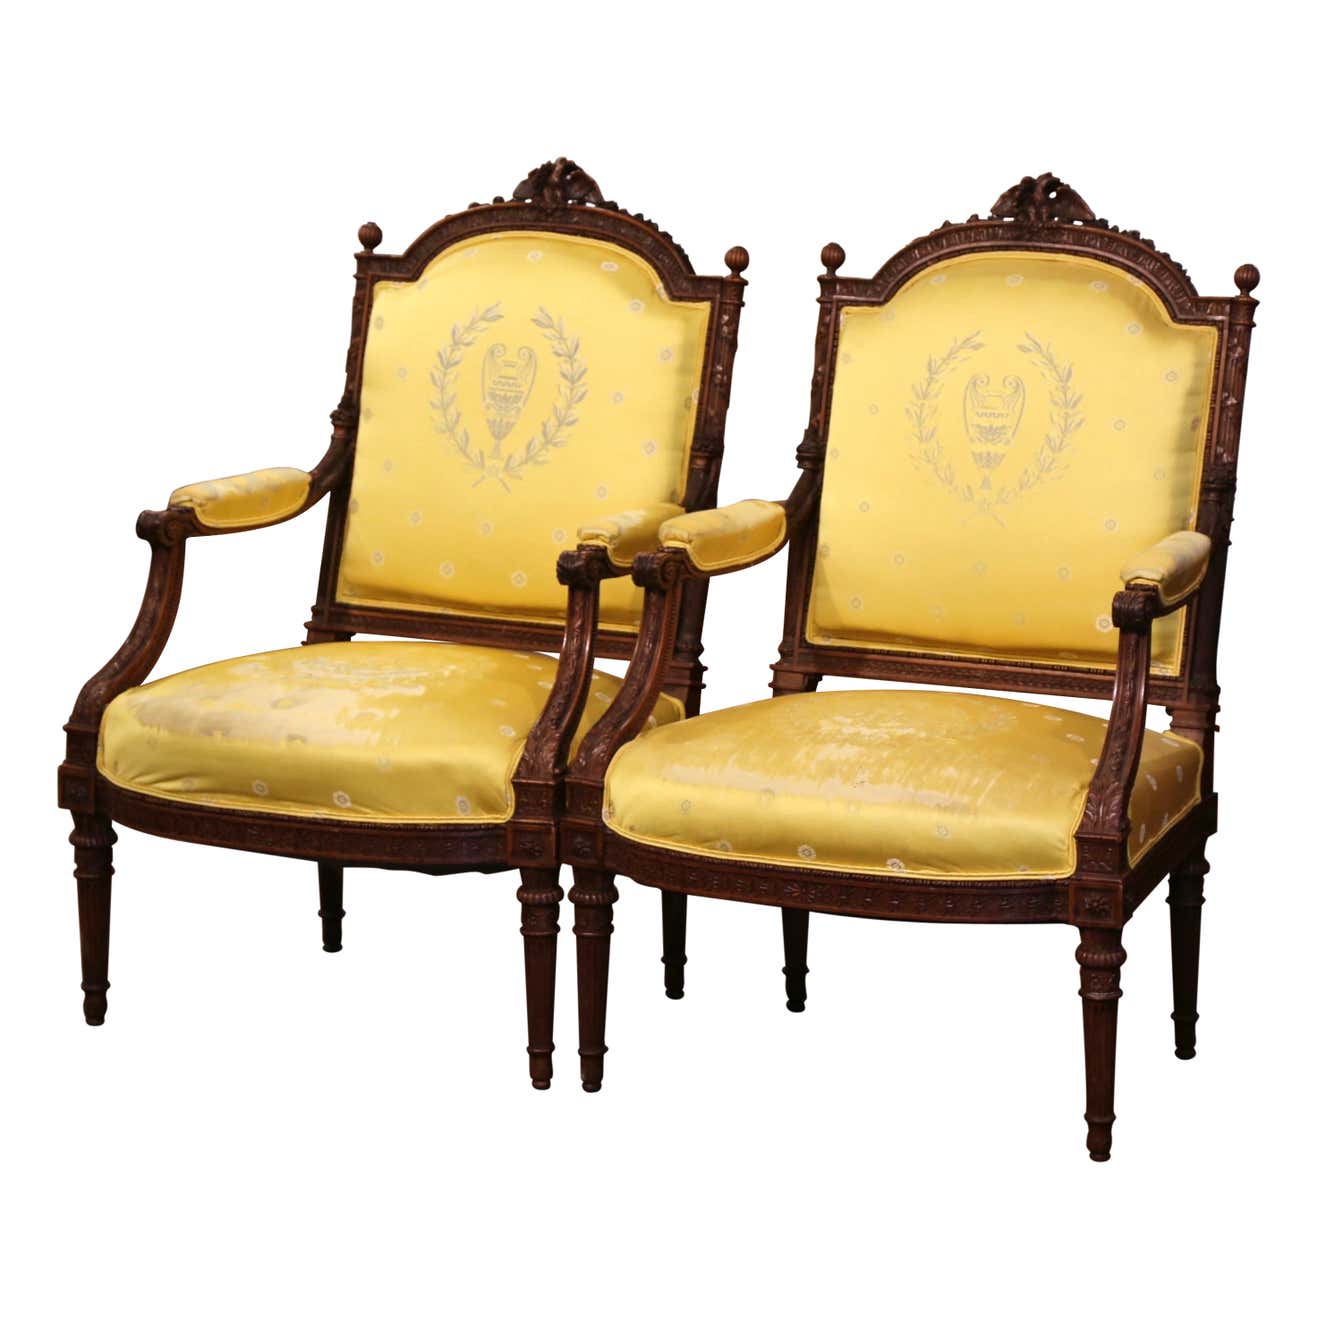 French Louis XVI Style Gold Leaf Arm Chairs - a Set of 6